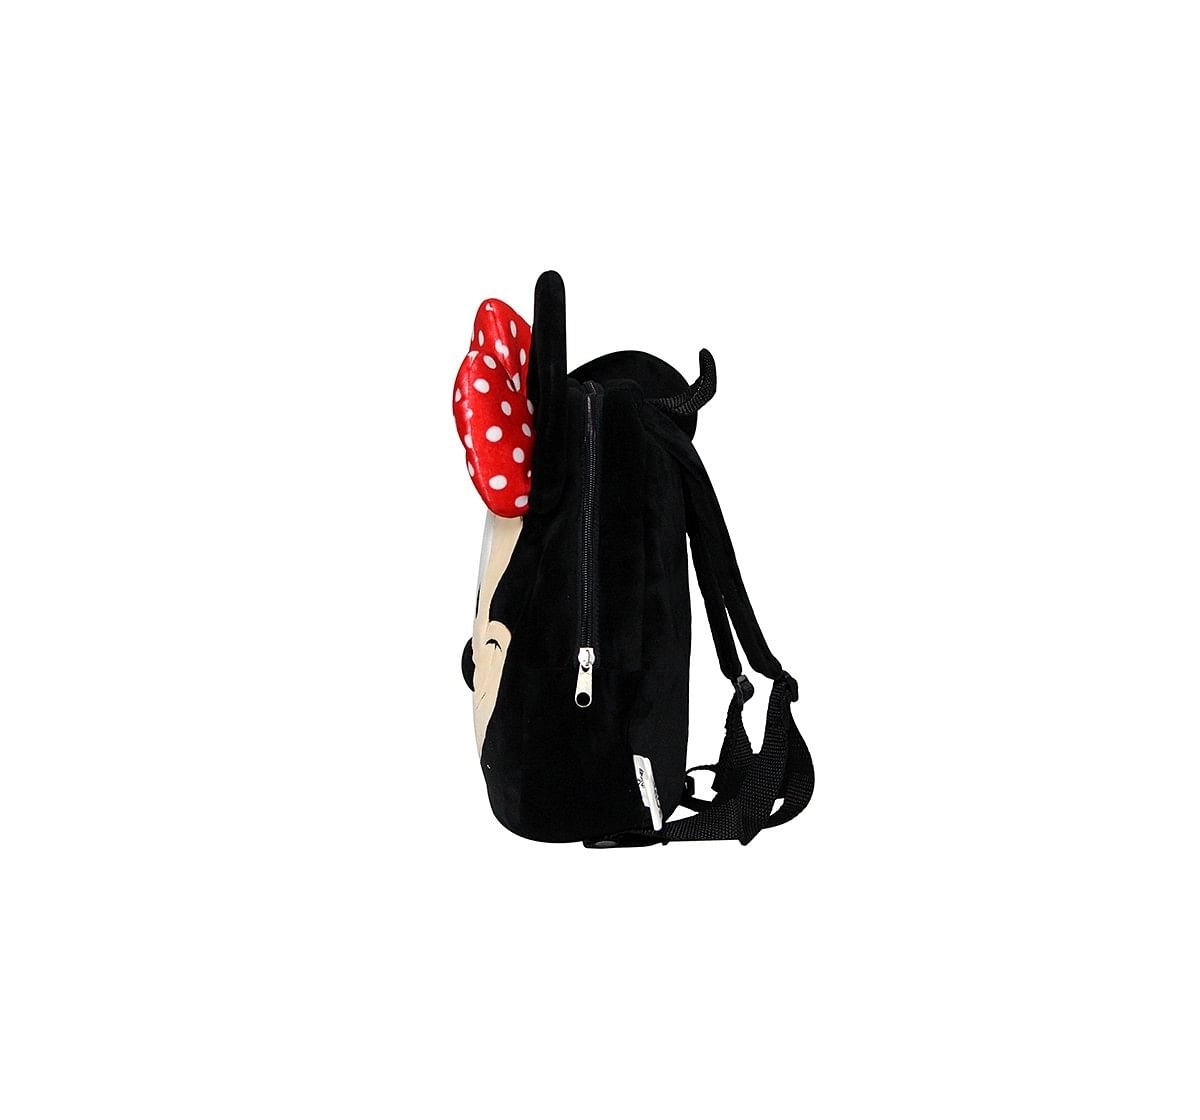 Disney Happiness Mickey Backpack_Multi_Free Size Plush Accessories for Kids age 12M+ - 29.21 Cm 